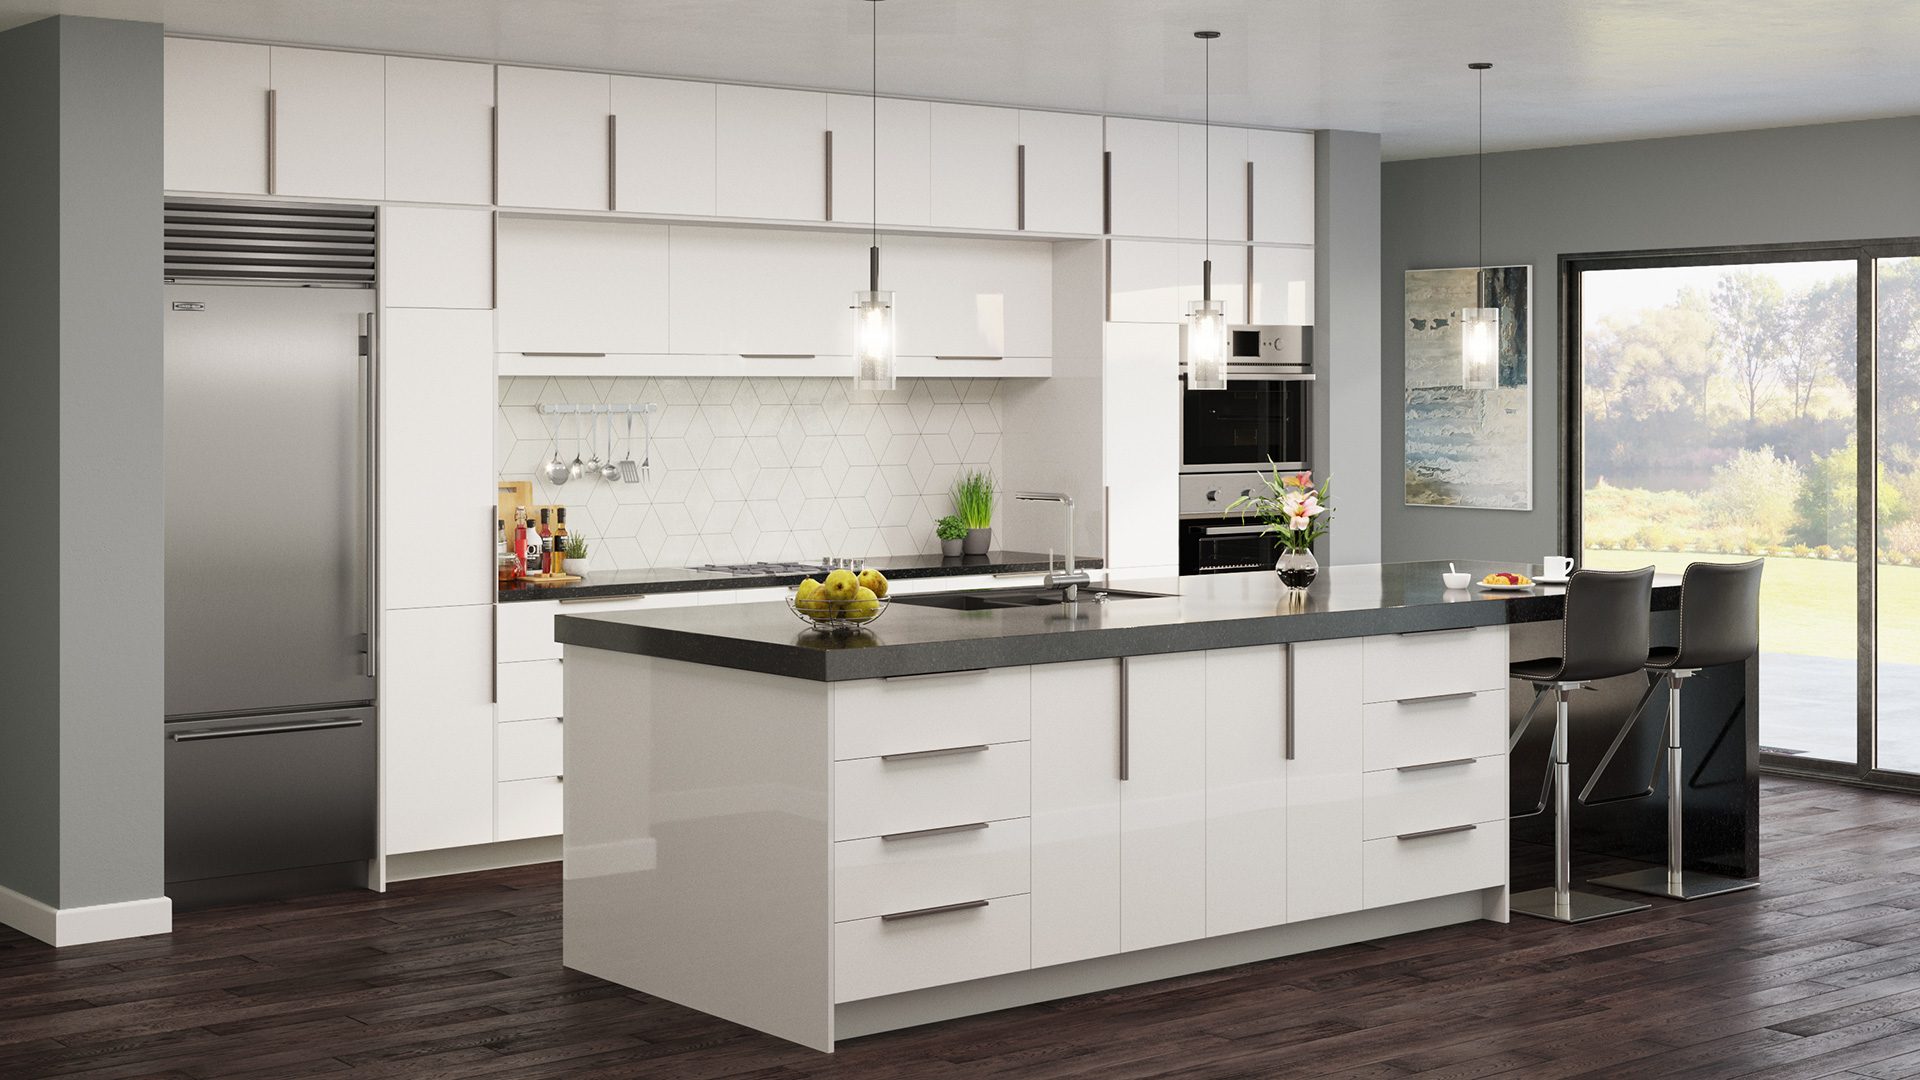 A Complete Guidance on How to Work with RTA Kitchen Cabinets